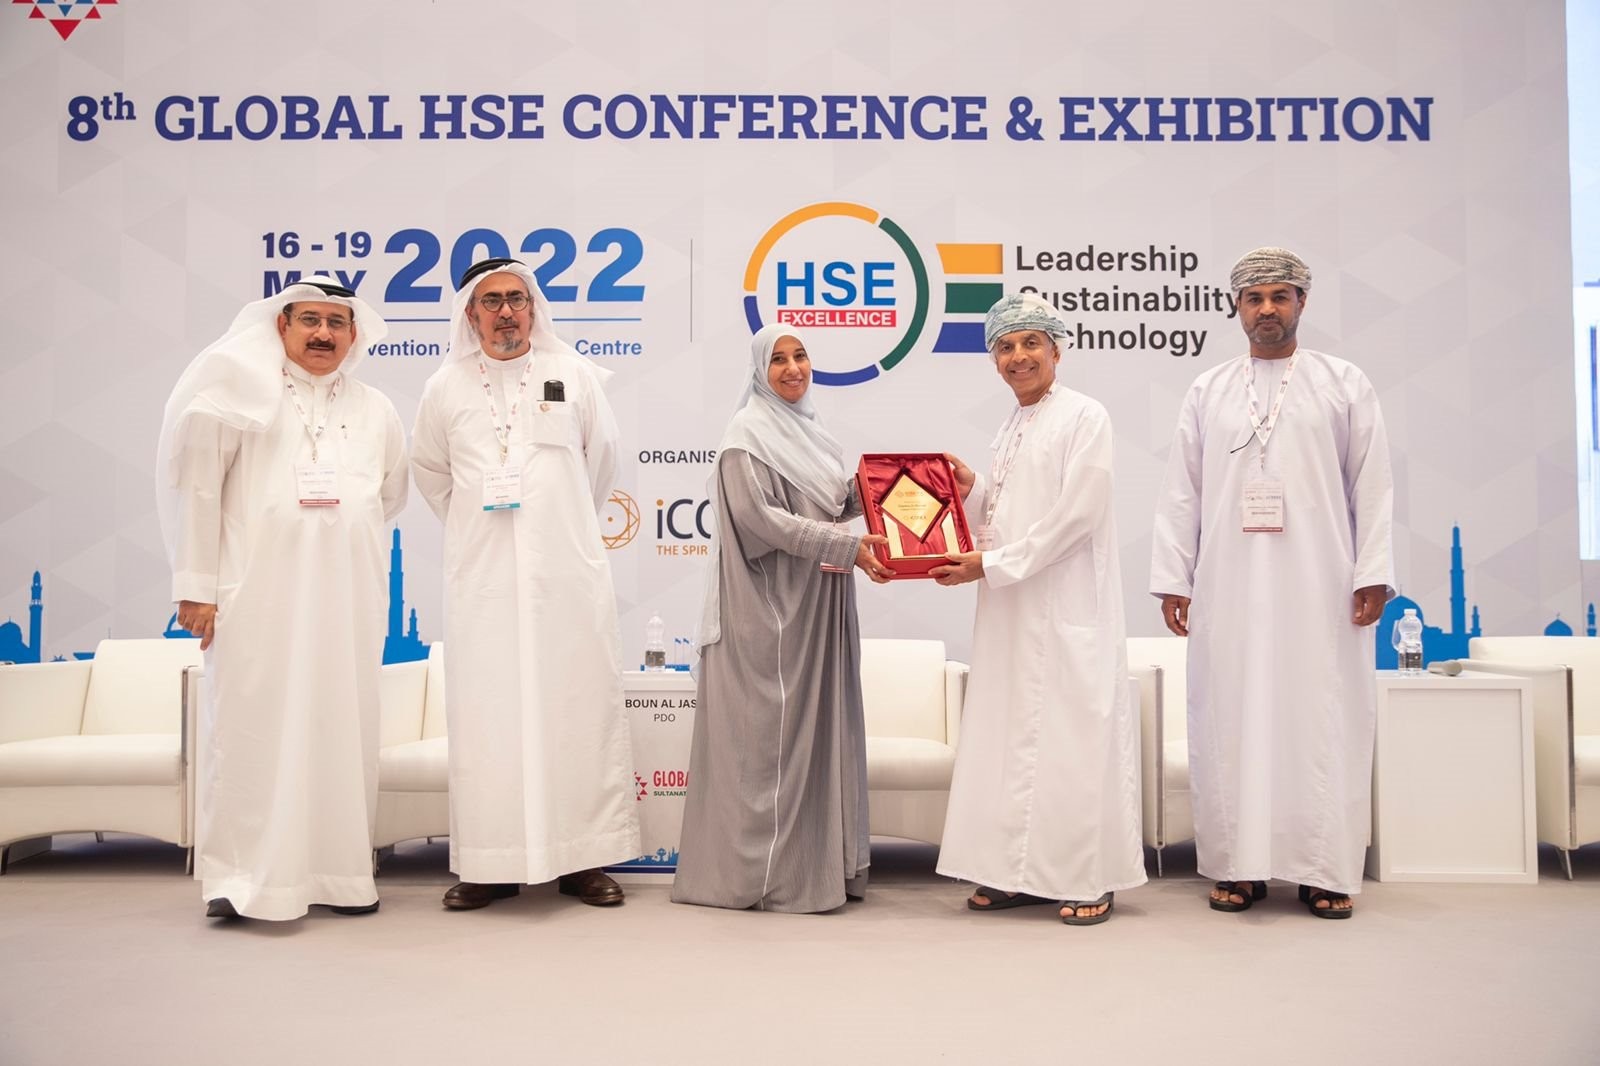 Leadership, Sustainability Technology in HSE